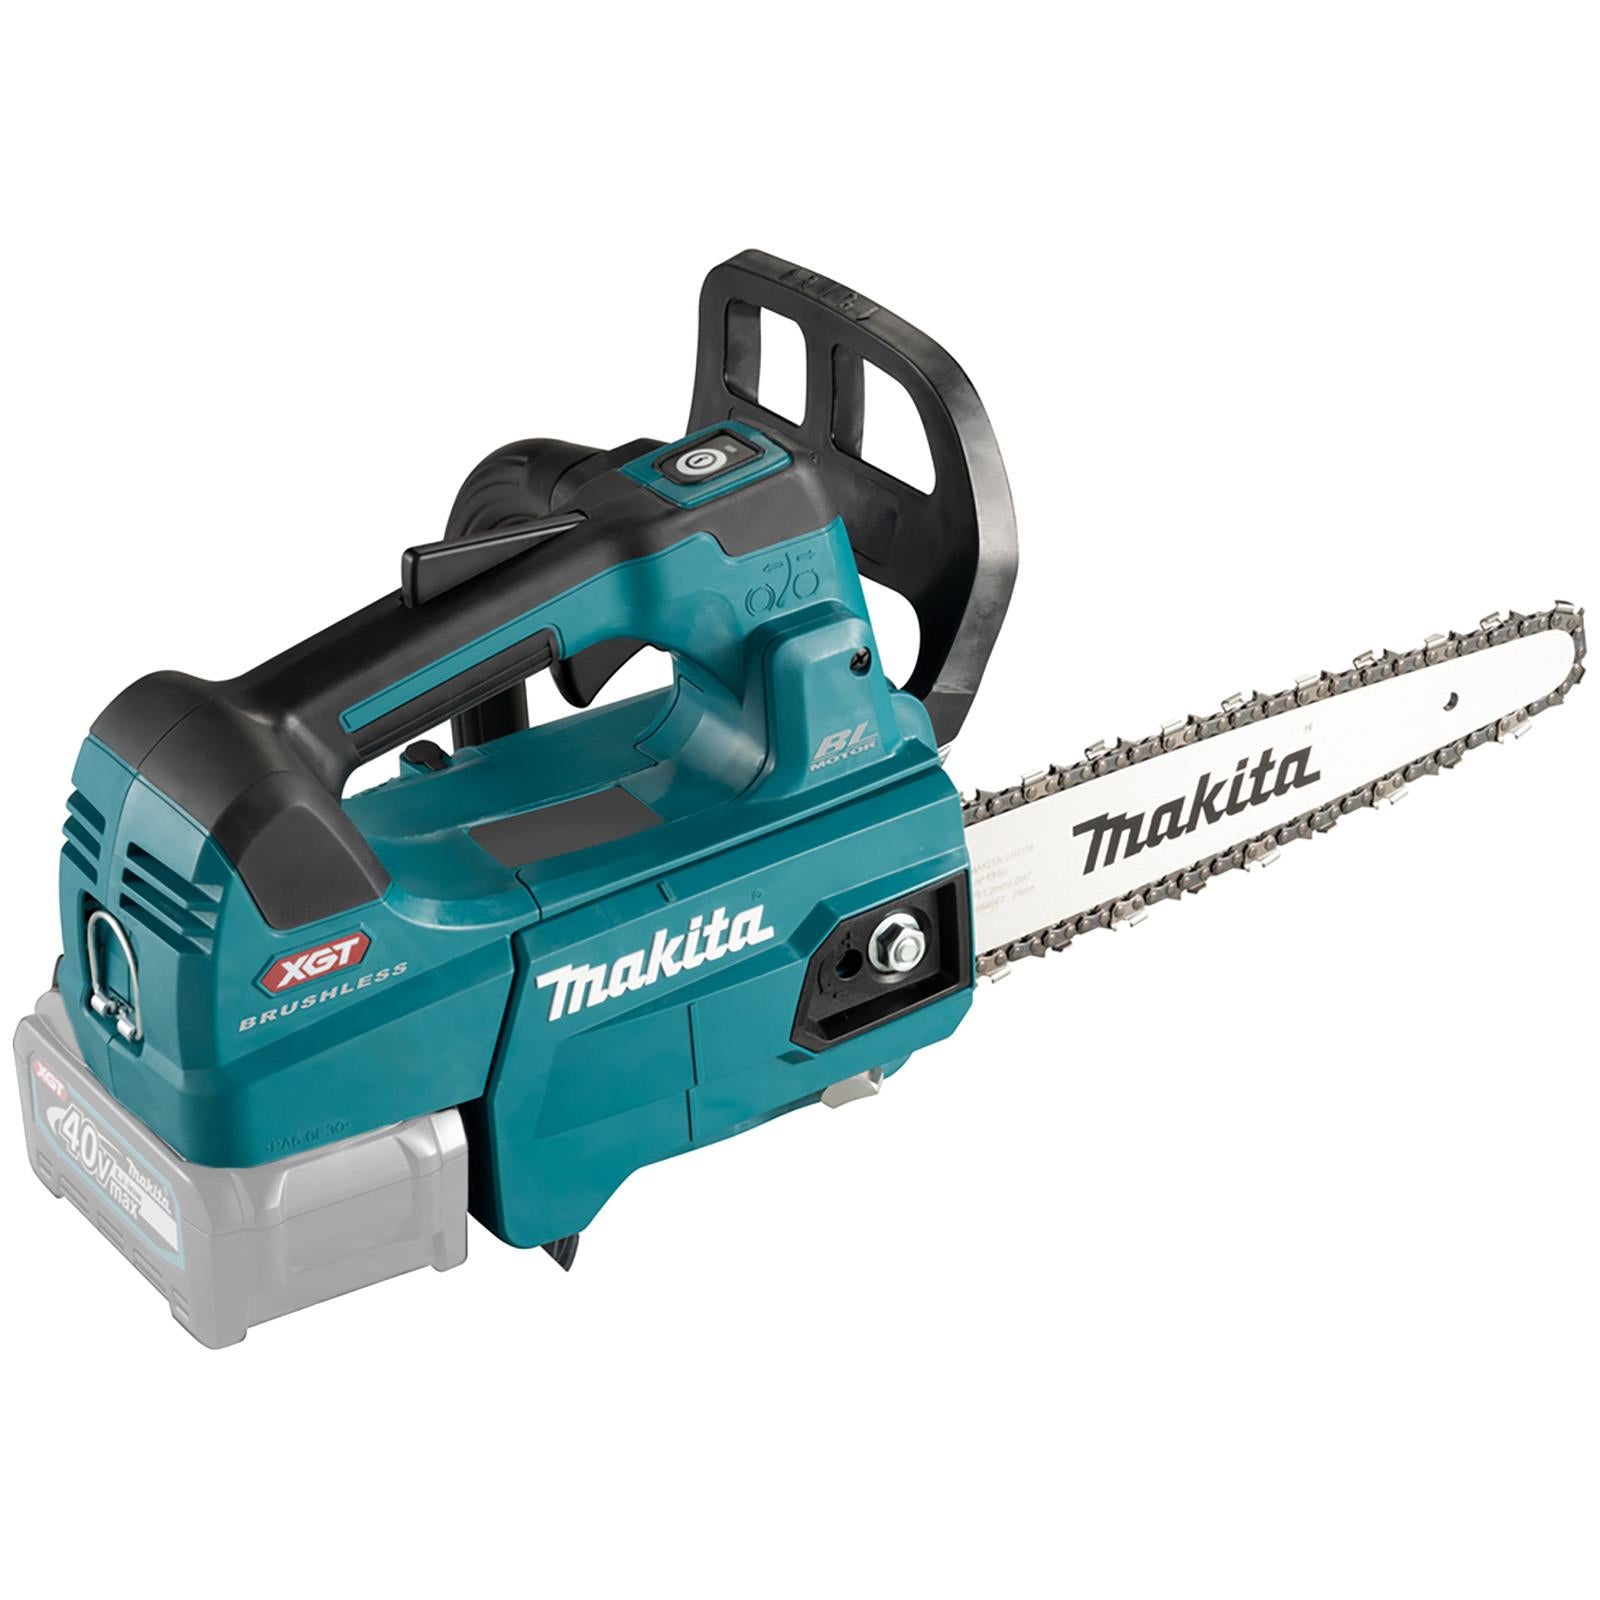 Makita Chainsaw 25cm 10" 40V XGT Brushless Cordless Top Handle Garden Tree Cutting Pruning Bare Unit Body Only UC006GZ